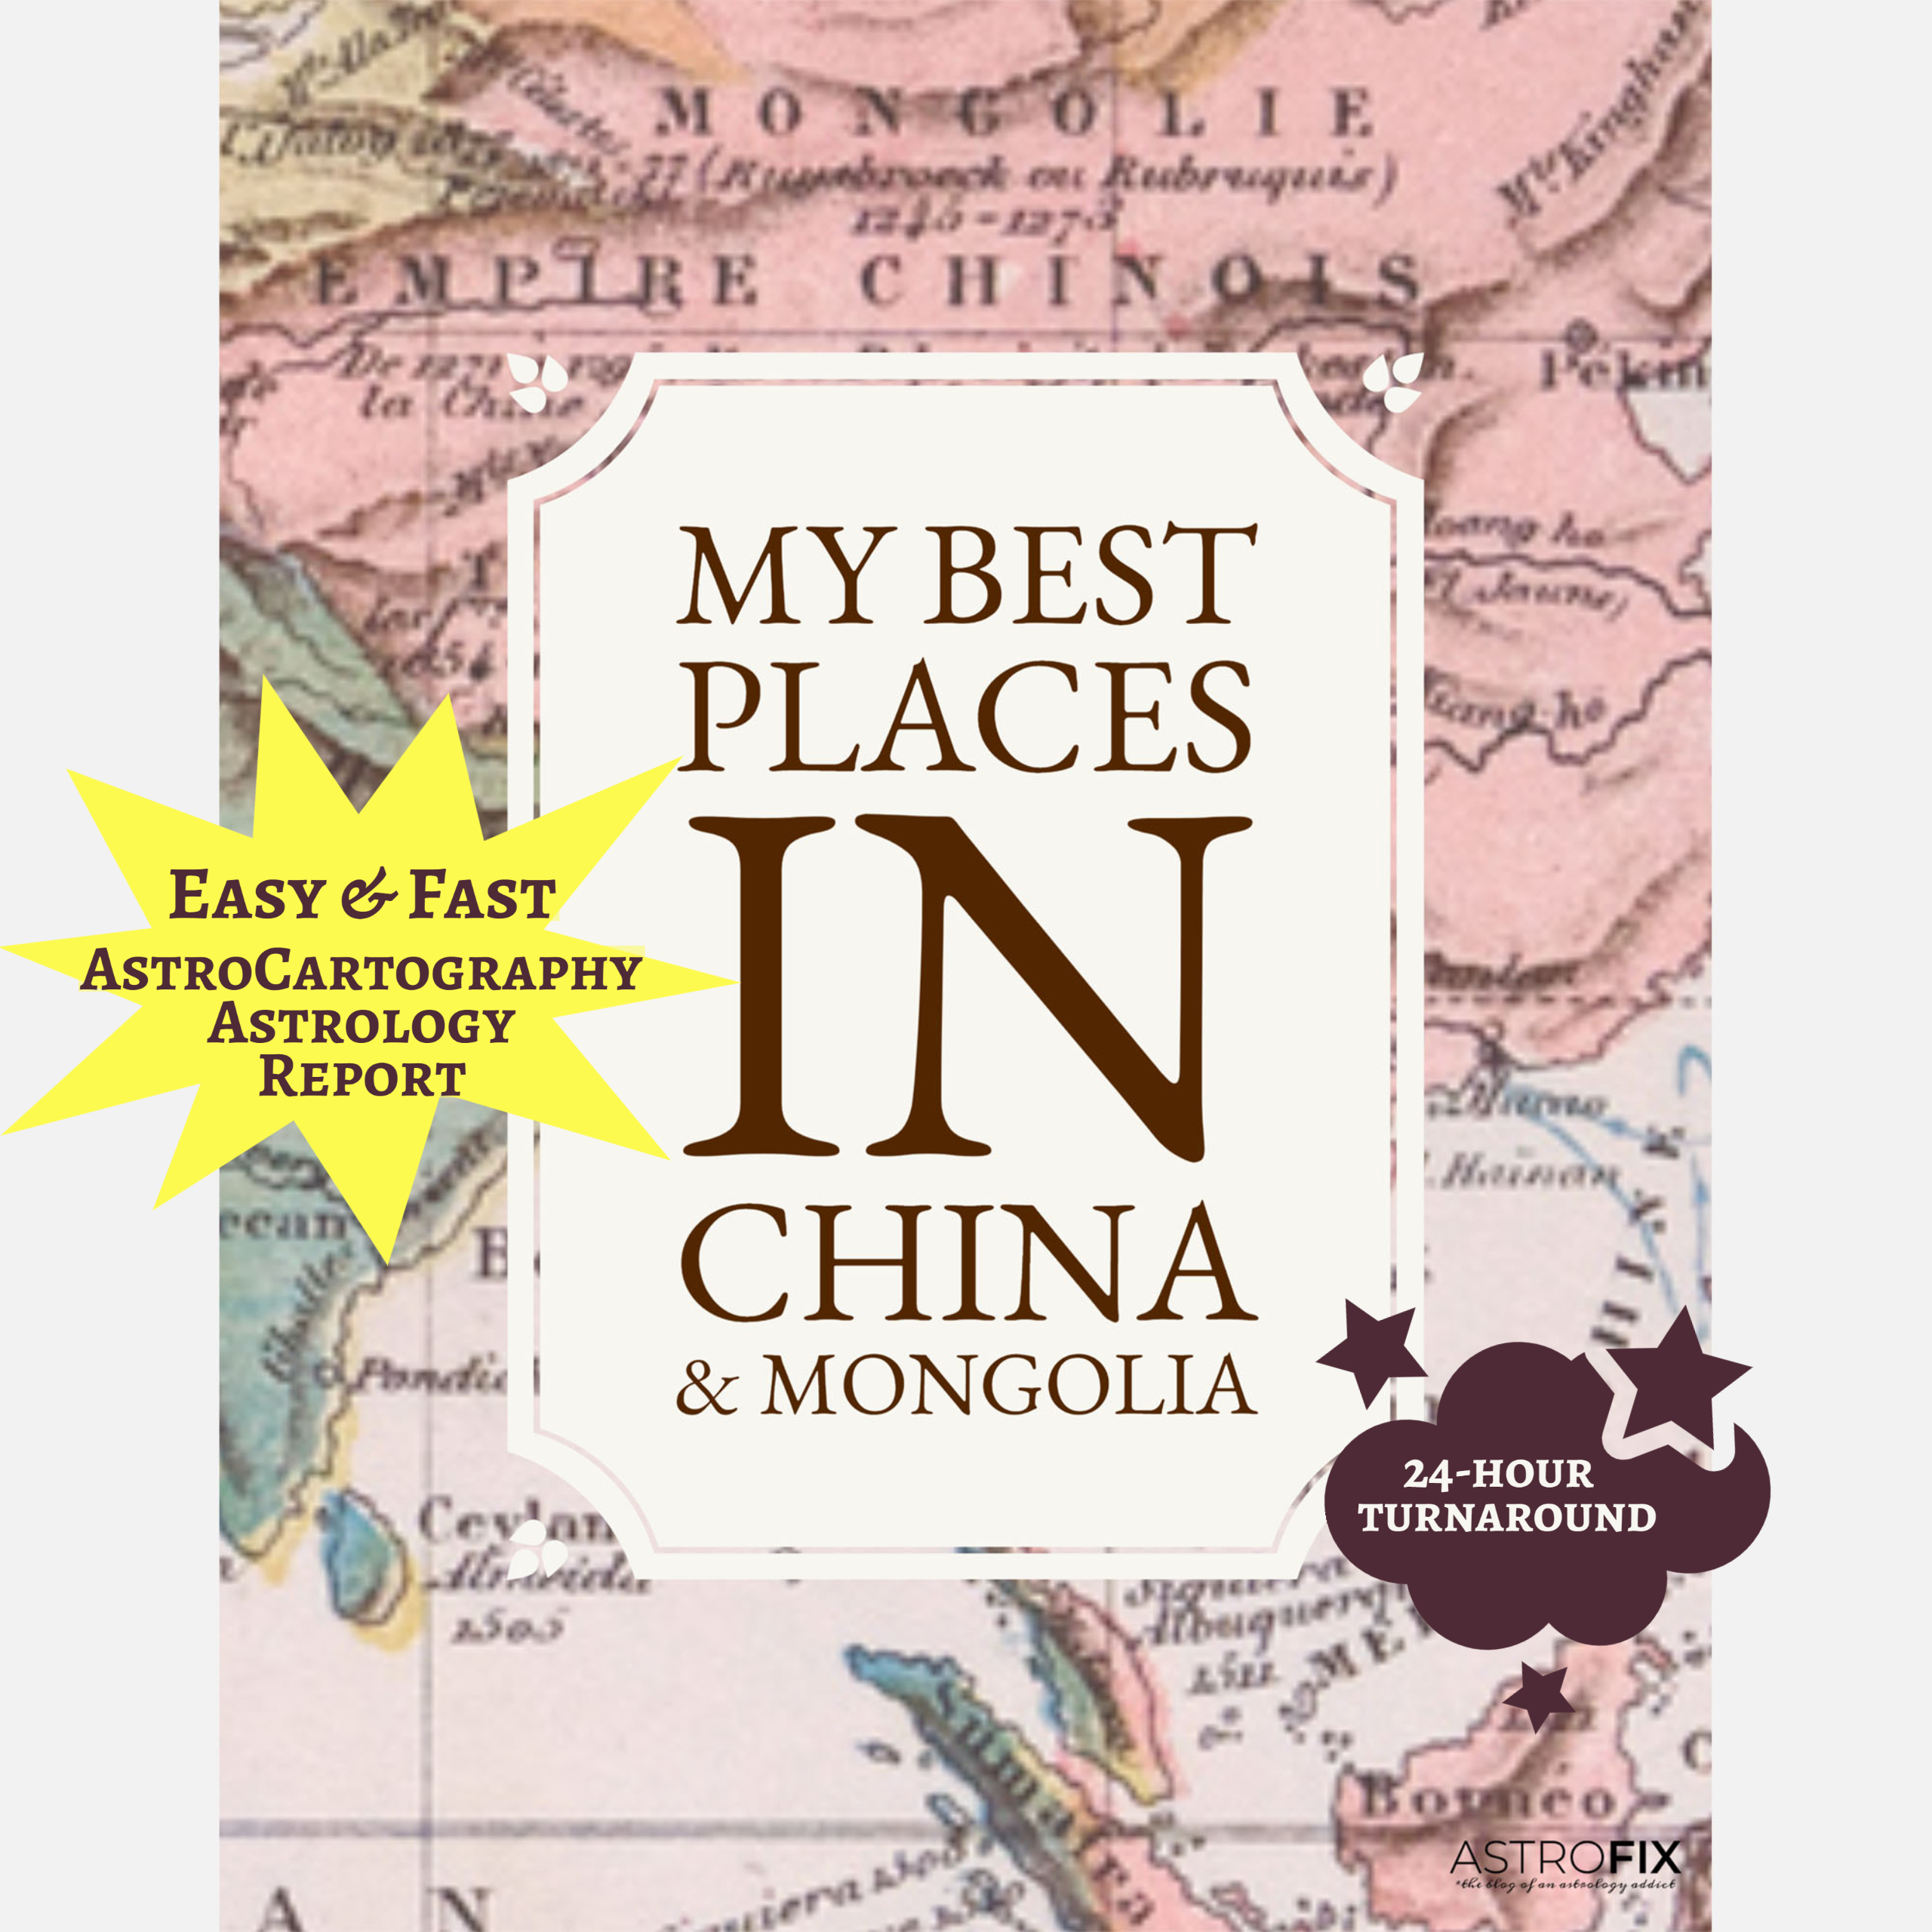 My Best Places in China AstroCartography Report